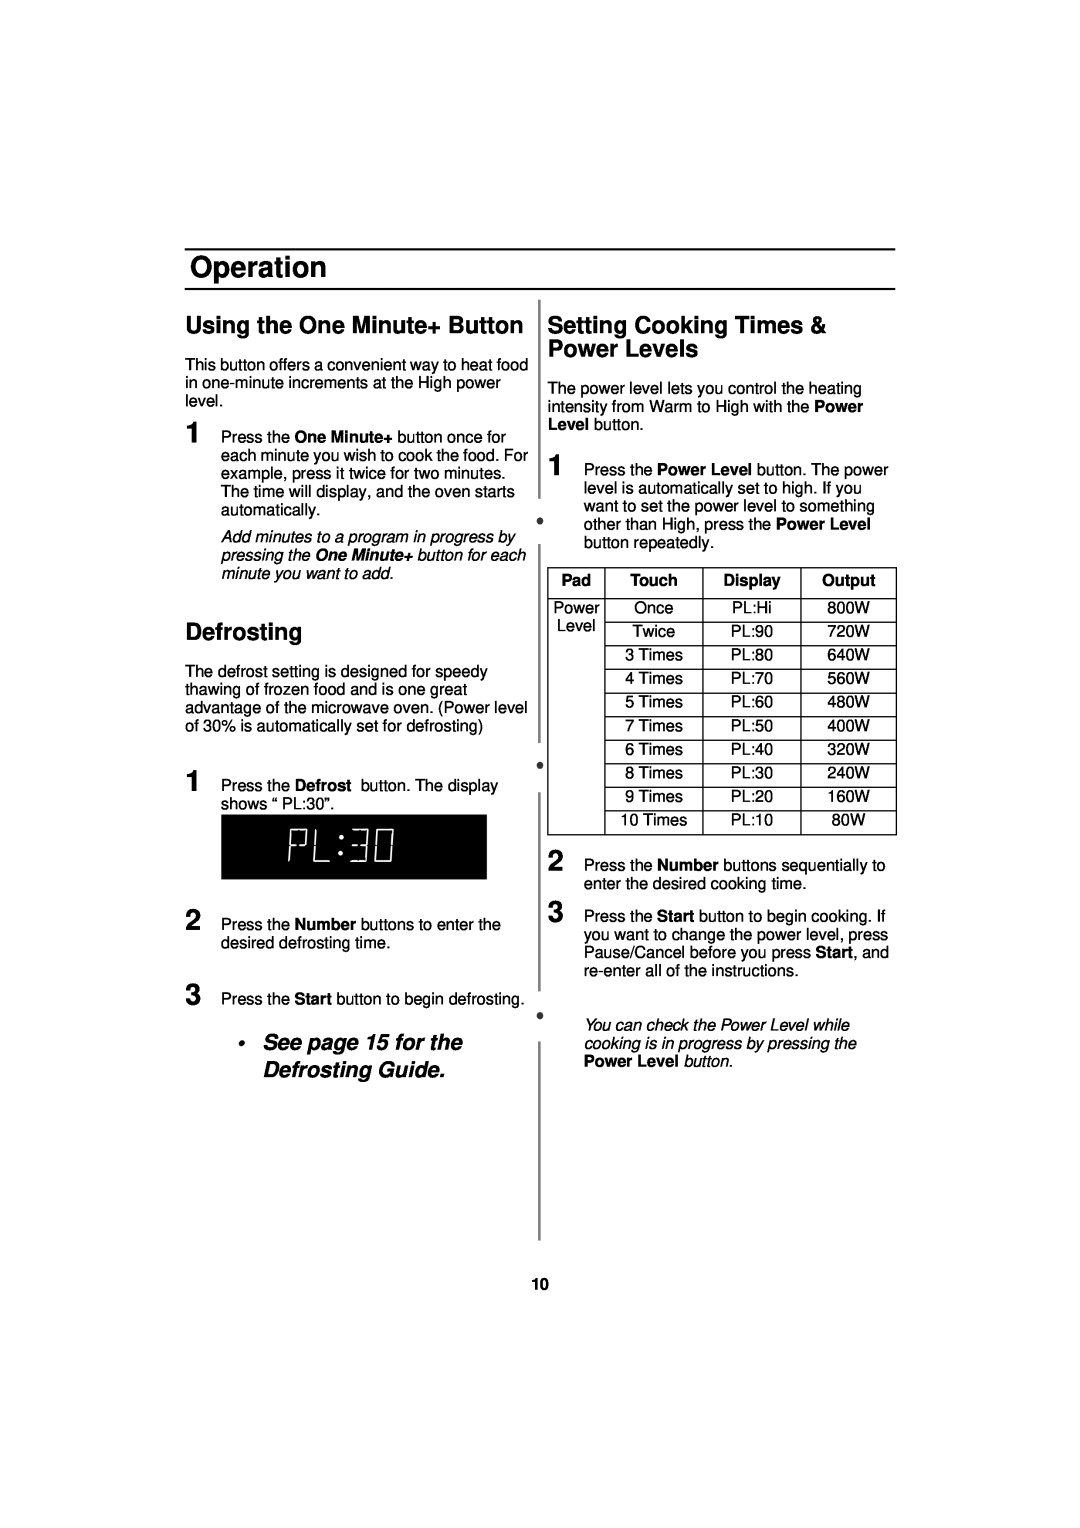 Samsung MW830WA owner manual Using the One Minute+ Button, Defrosting, Setting Cooking Times & Power Levels, Operation 